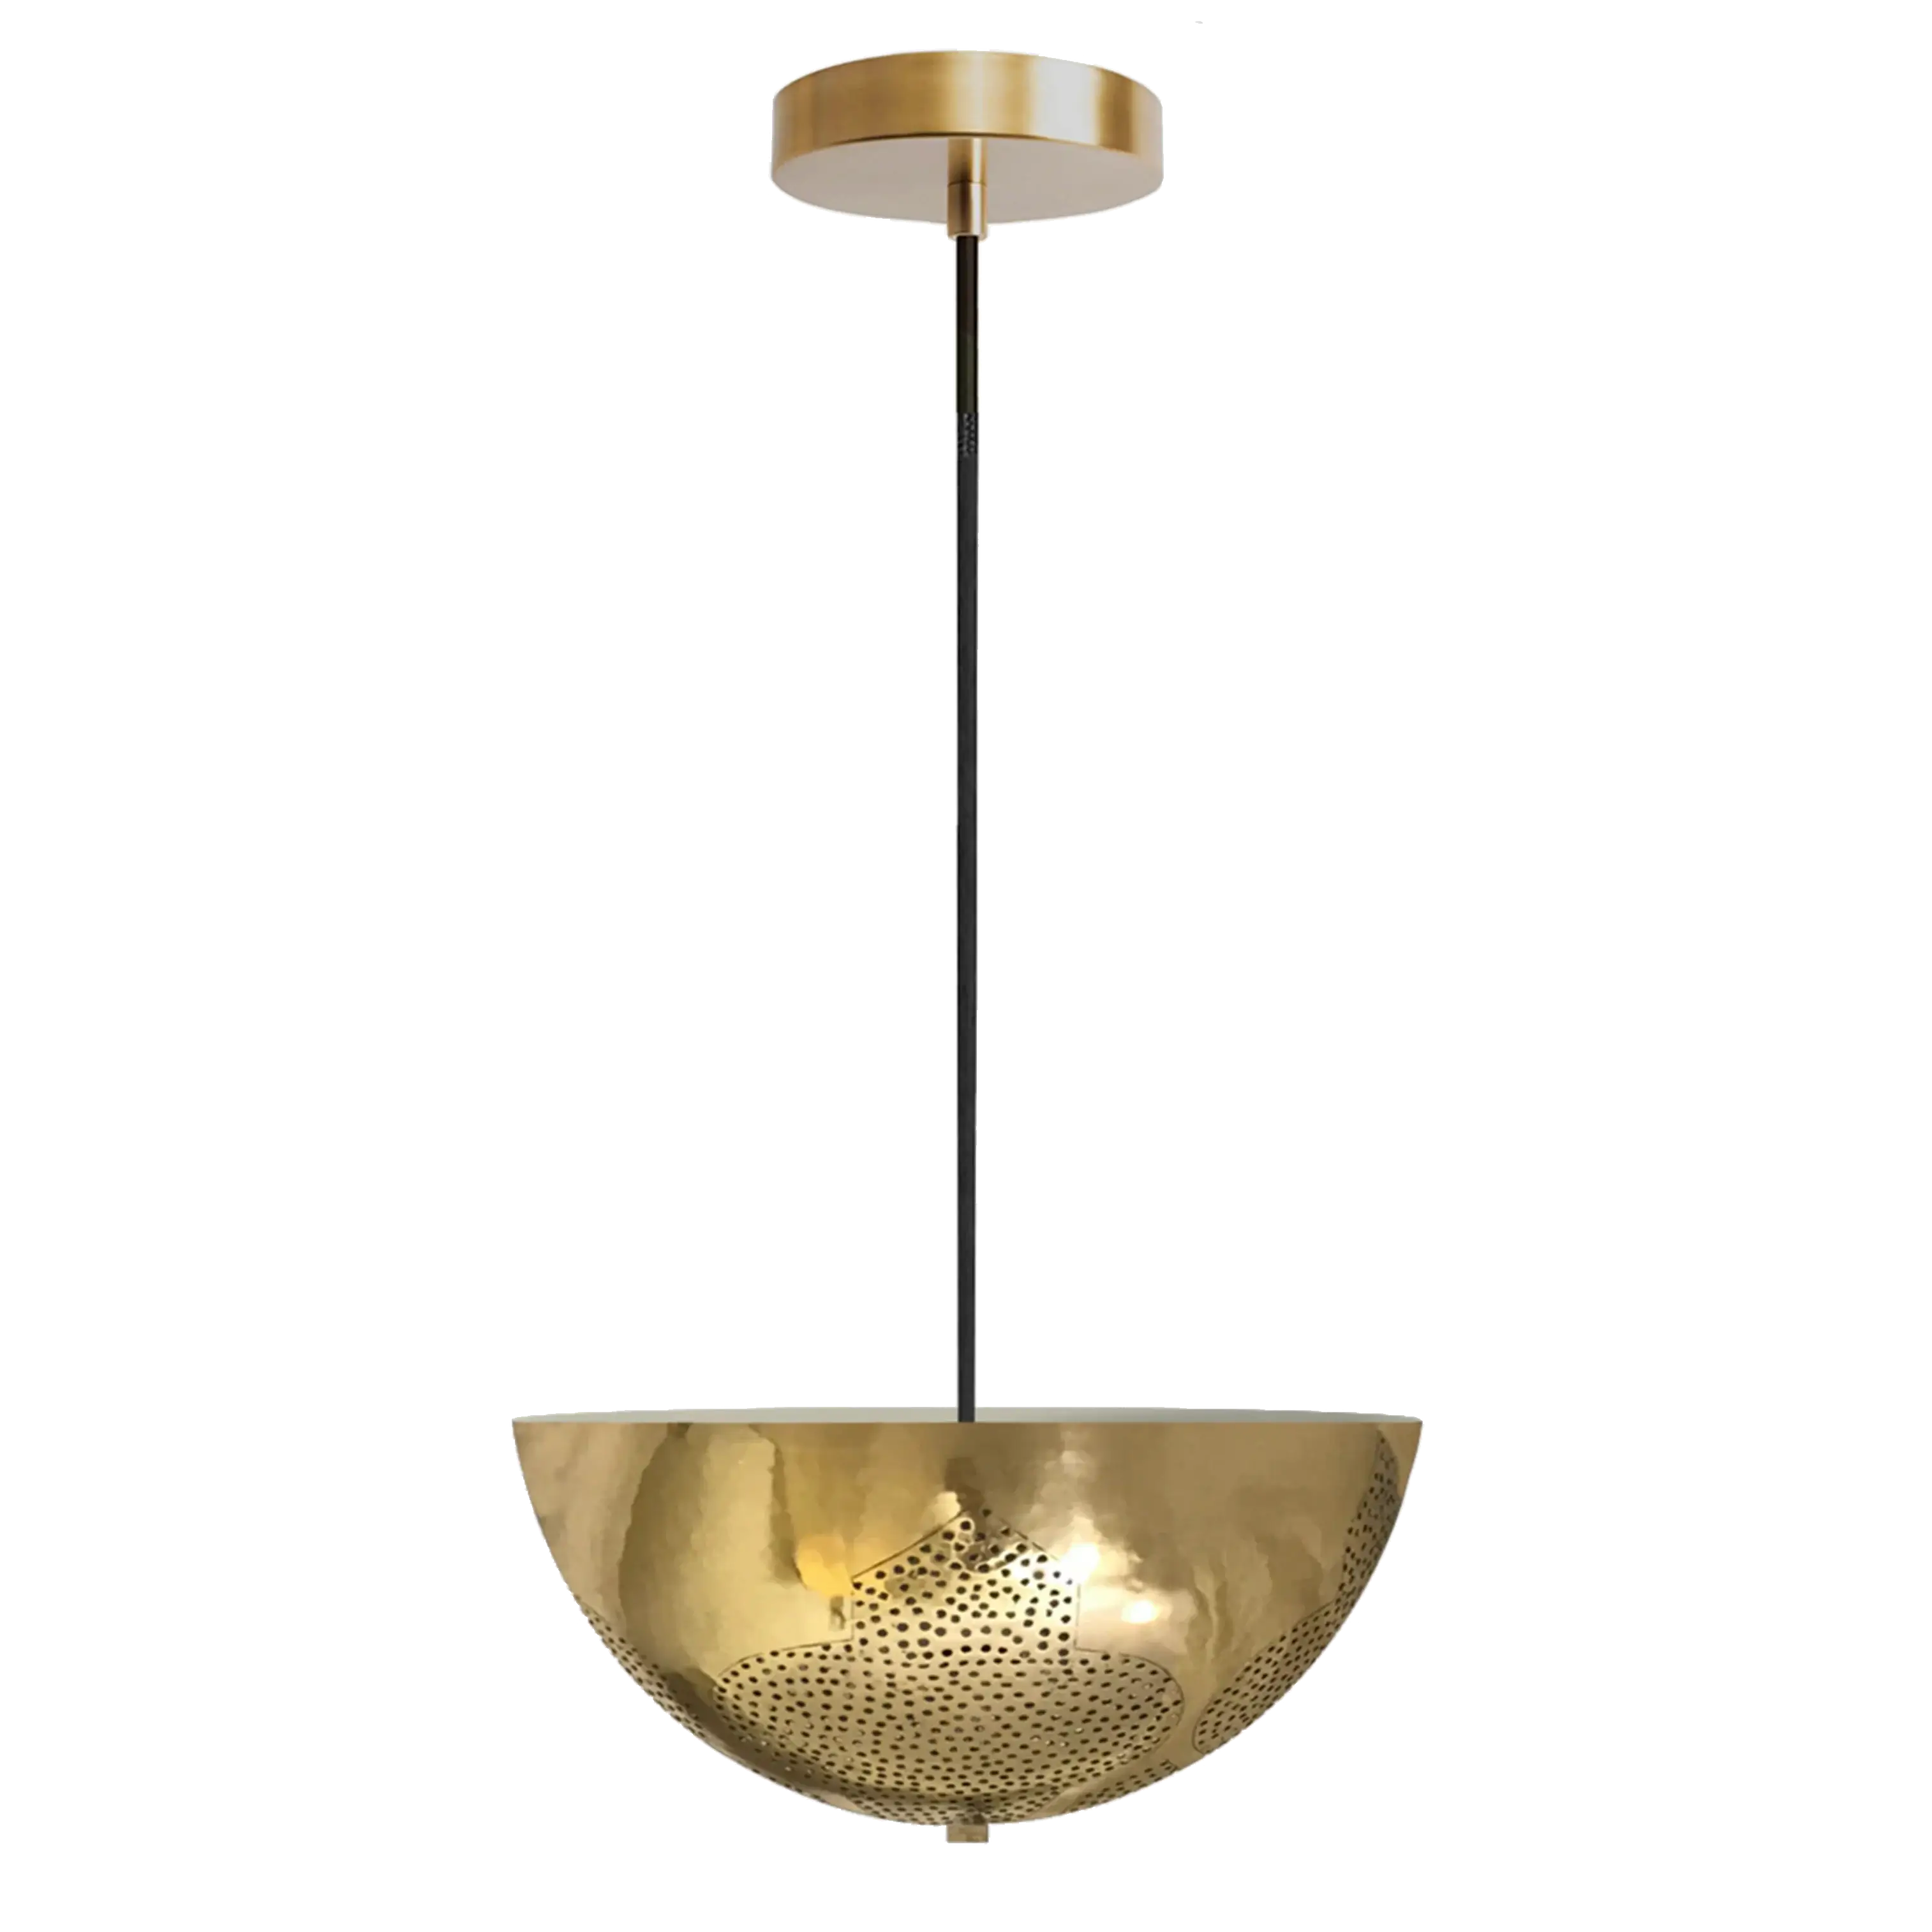 Dounia home Pendant light in polished brass  made of Metal, Model: Najma dome